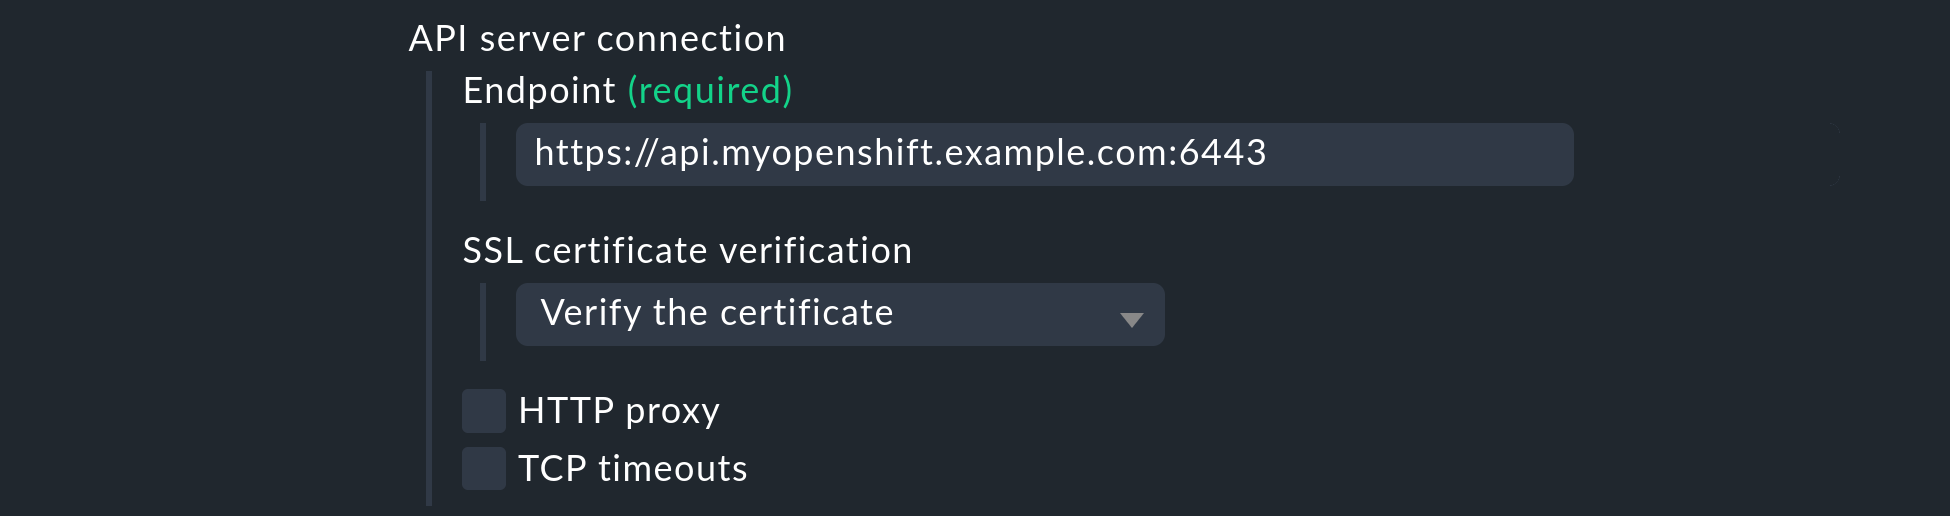 Example for specifying the API server connection.